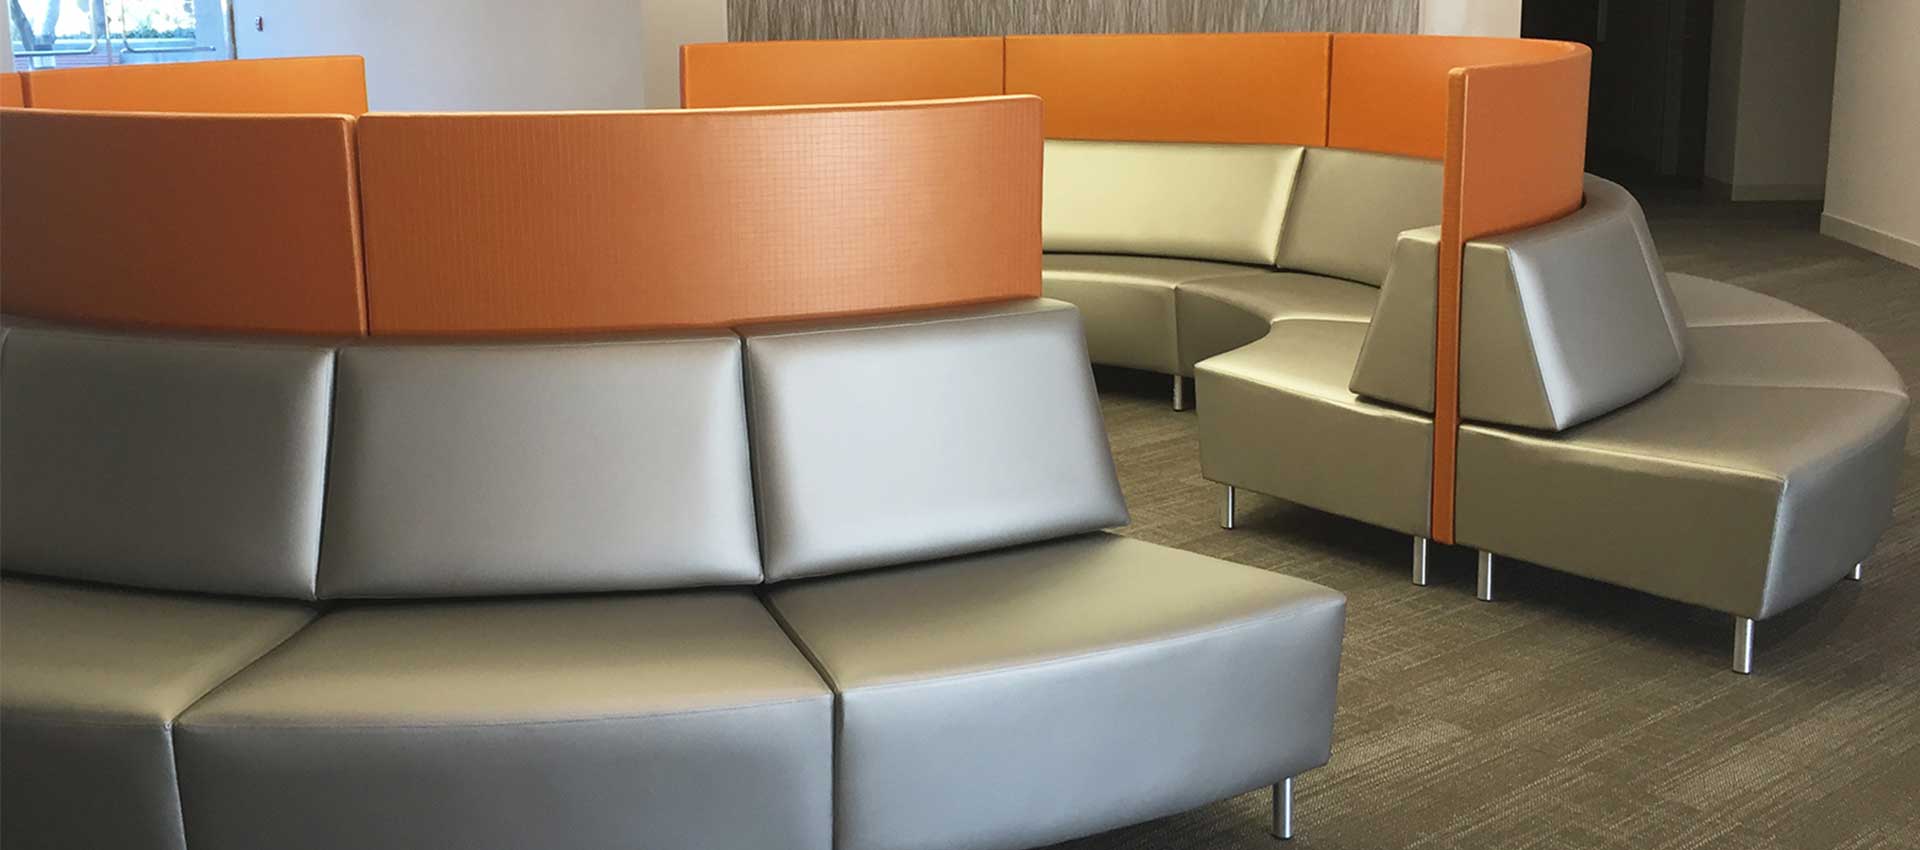 modular curved lounge seating for casino